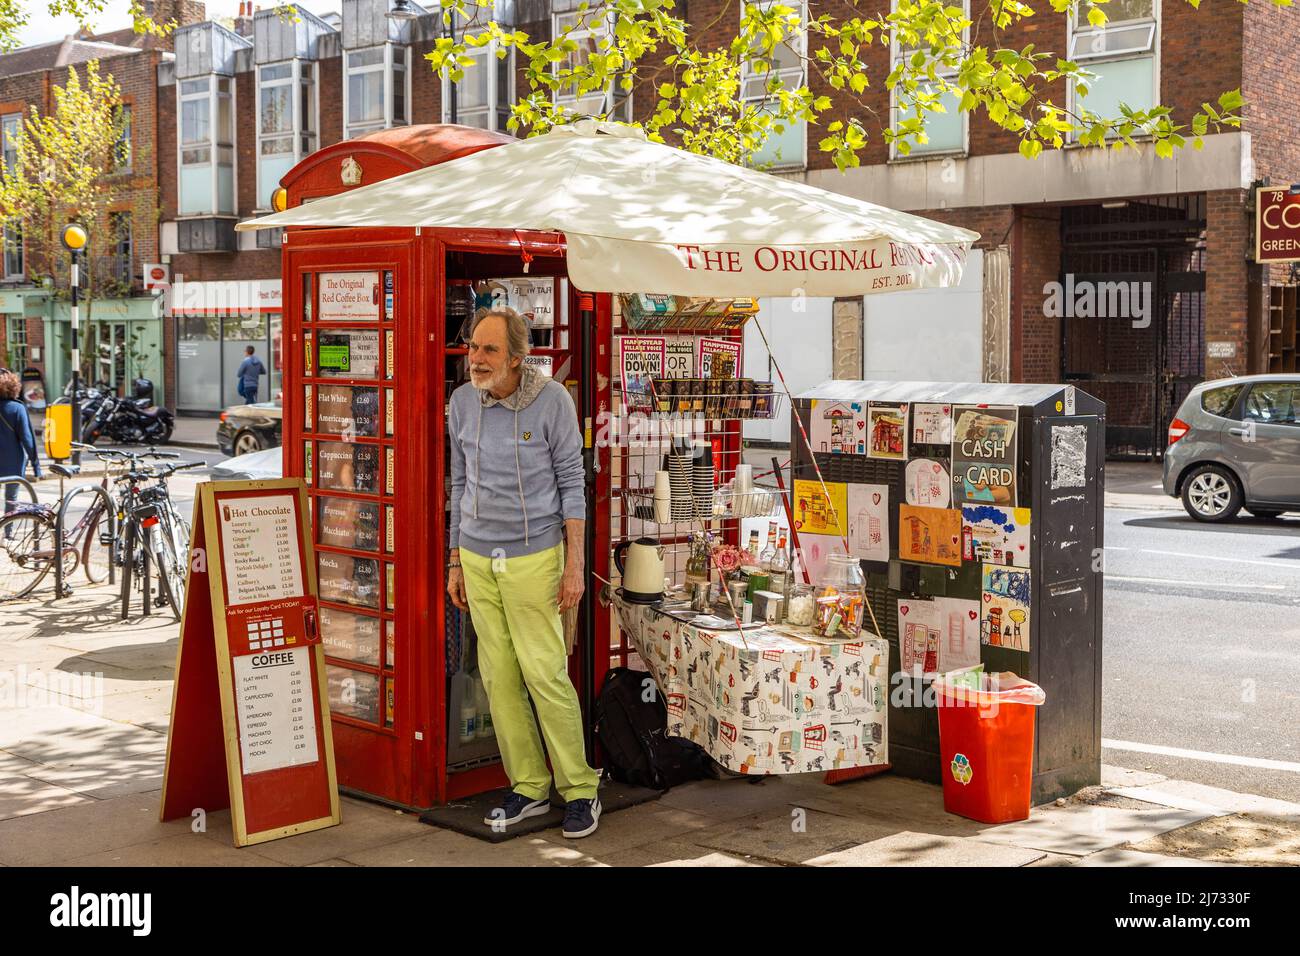 Coffee served from  a red London telephone box, Hampstead London UK England Stock Photo